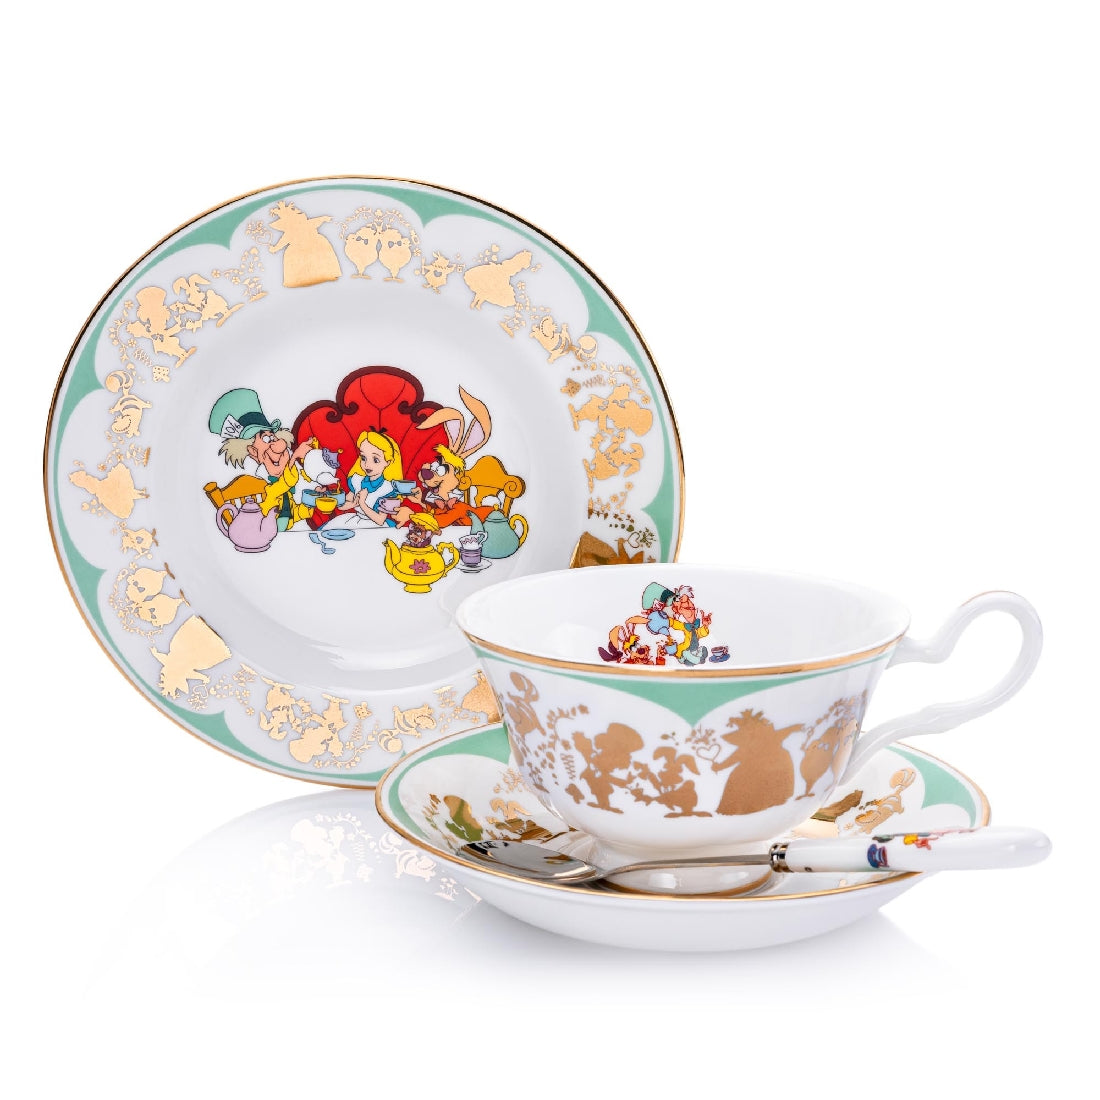 DISNEY ENGLISH LADIES COLLECTION CUP & SAUCER ALICE IN WONDERLAND MAD HATTER